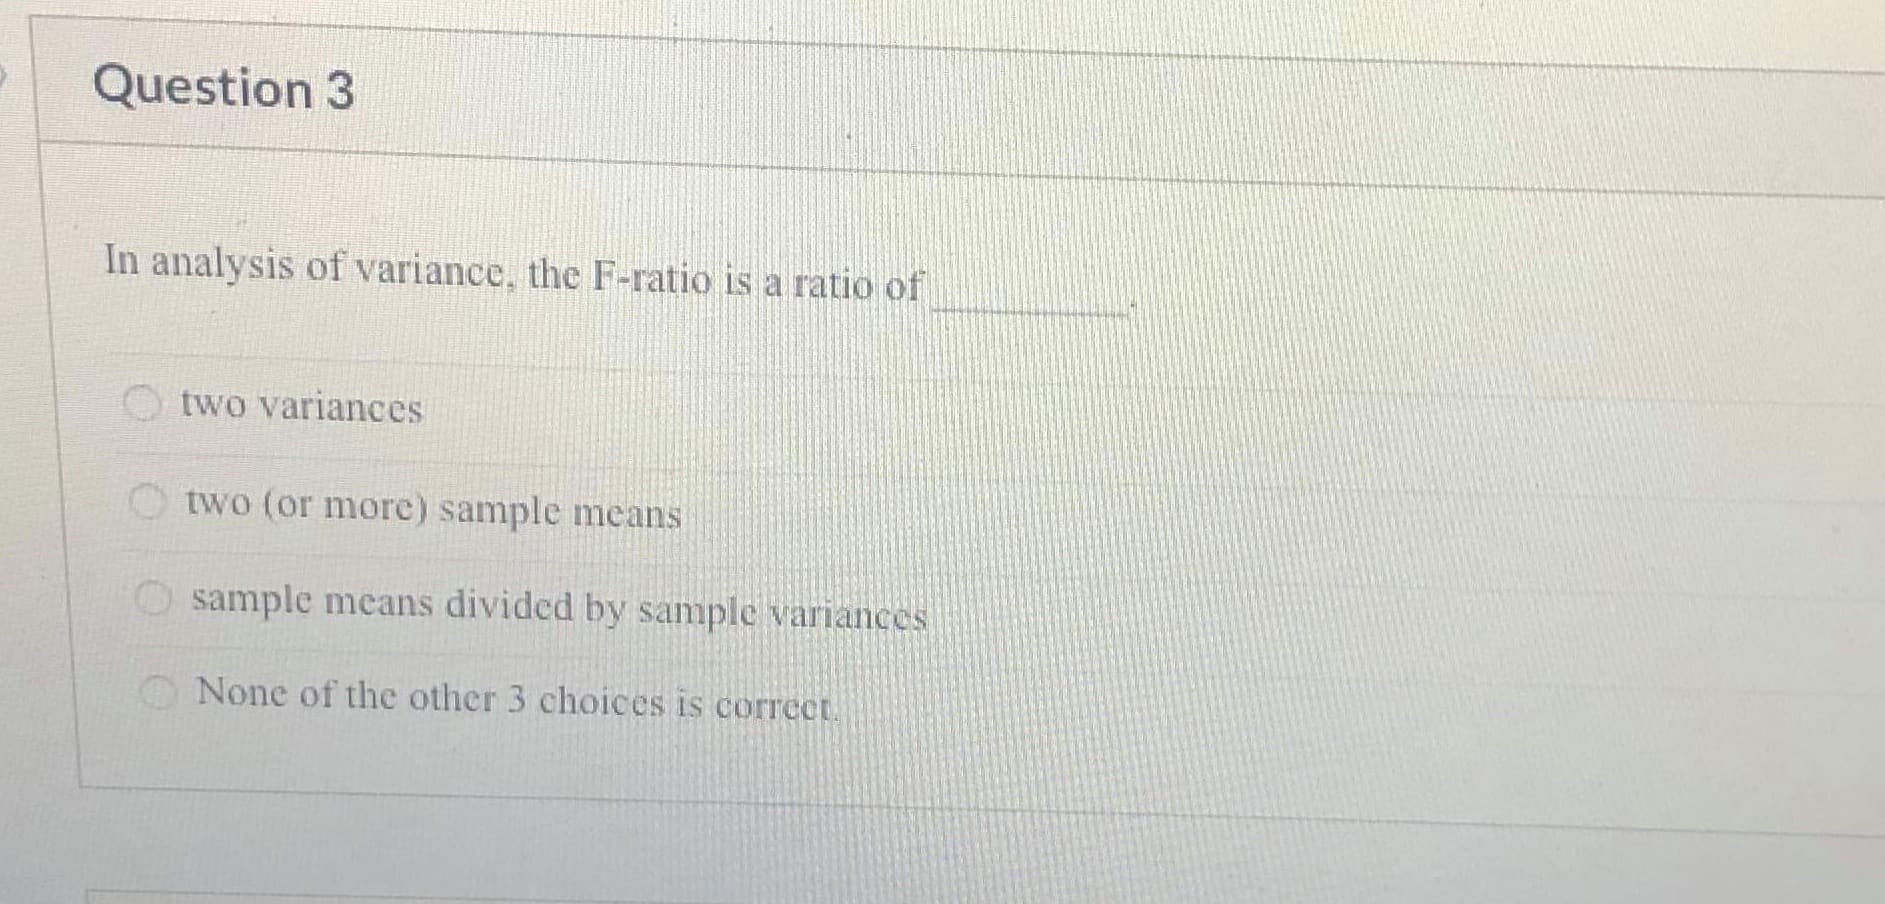 In analysis of variance, the F-ratio is a ratio of
